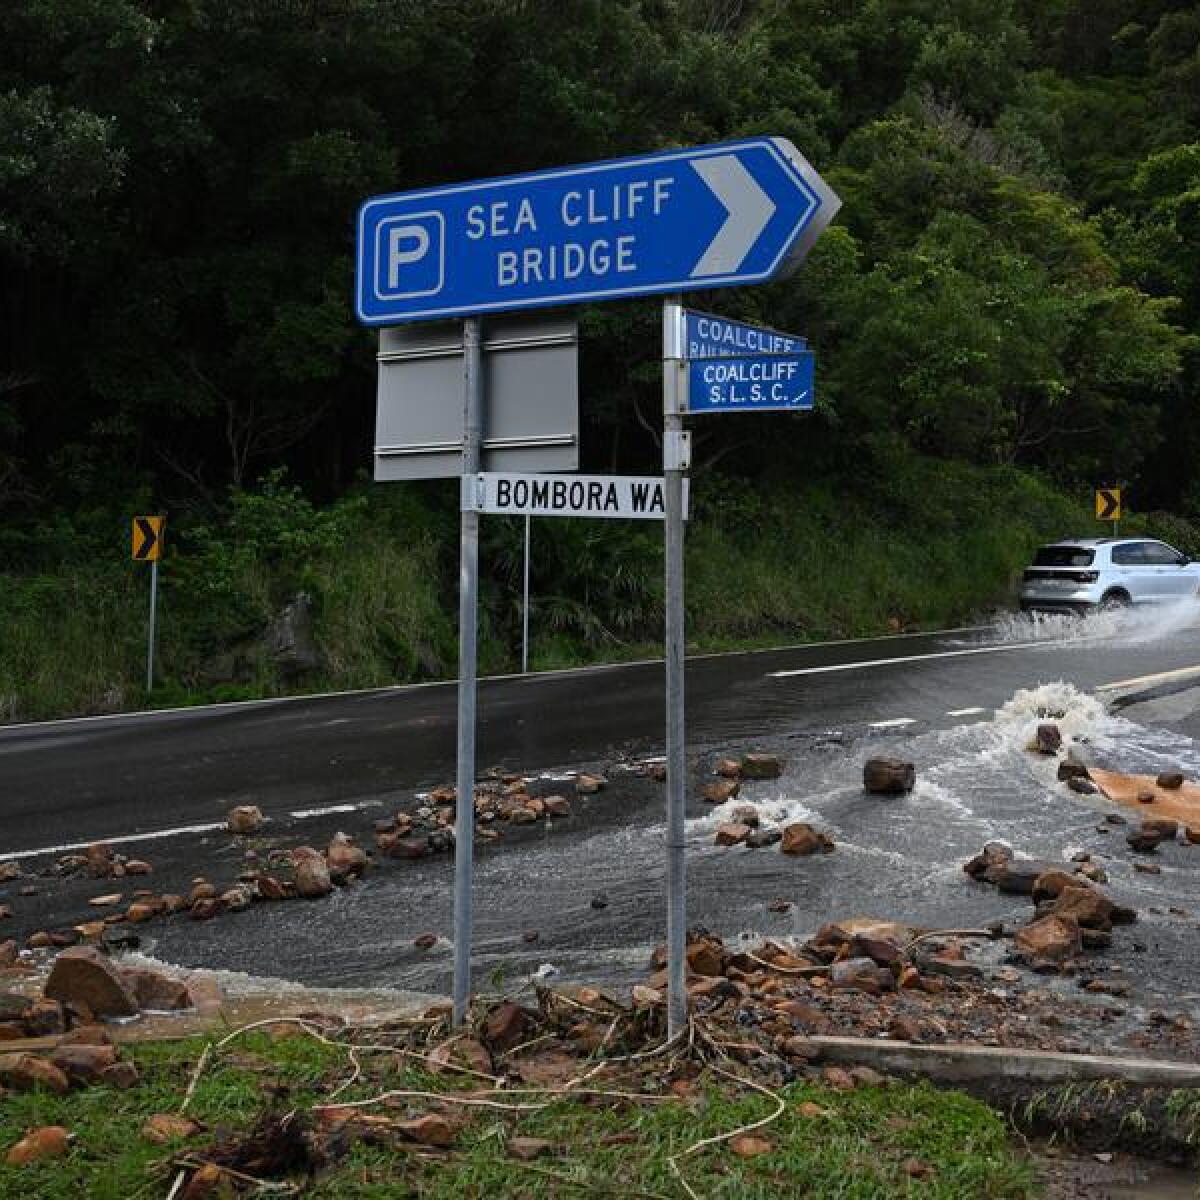 Damage caused by flash flooding and landslides north of Wollongong.